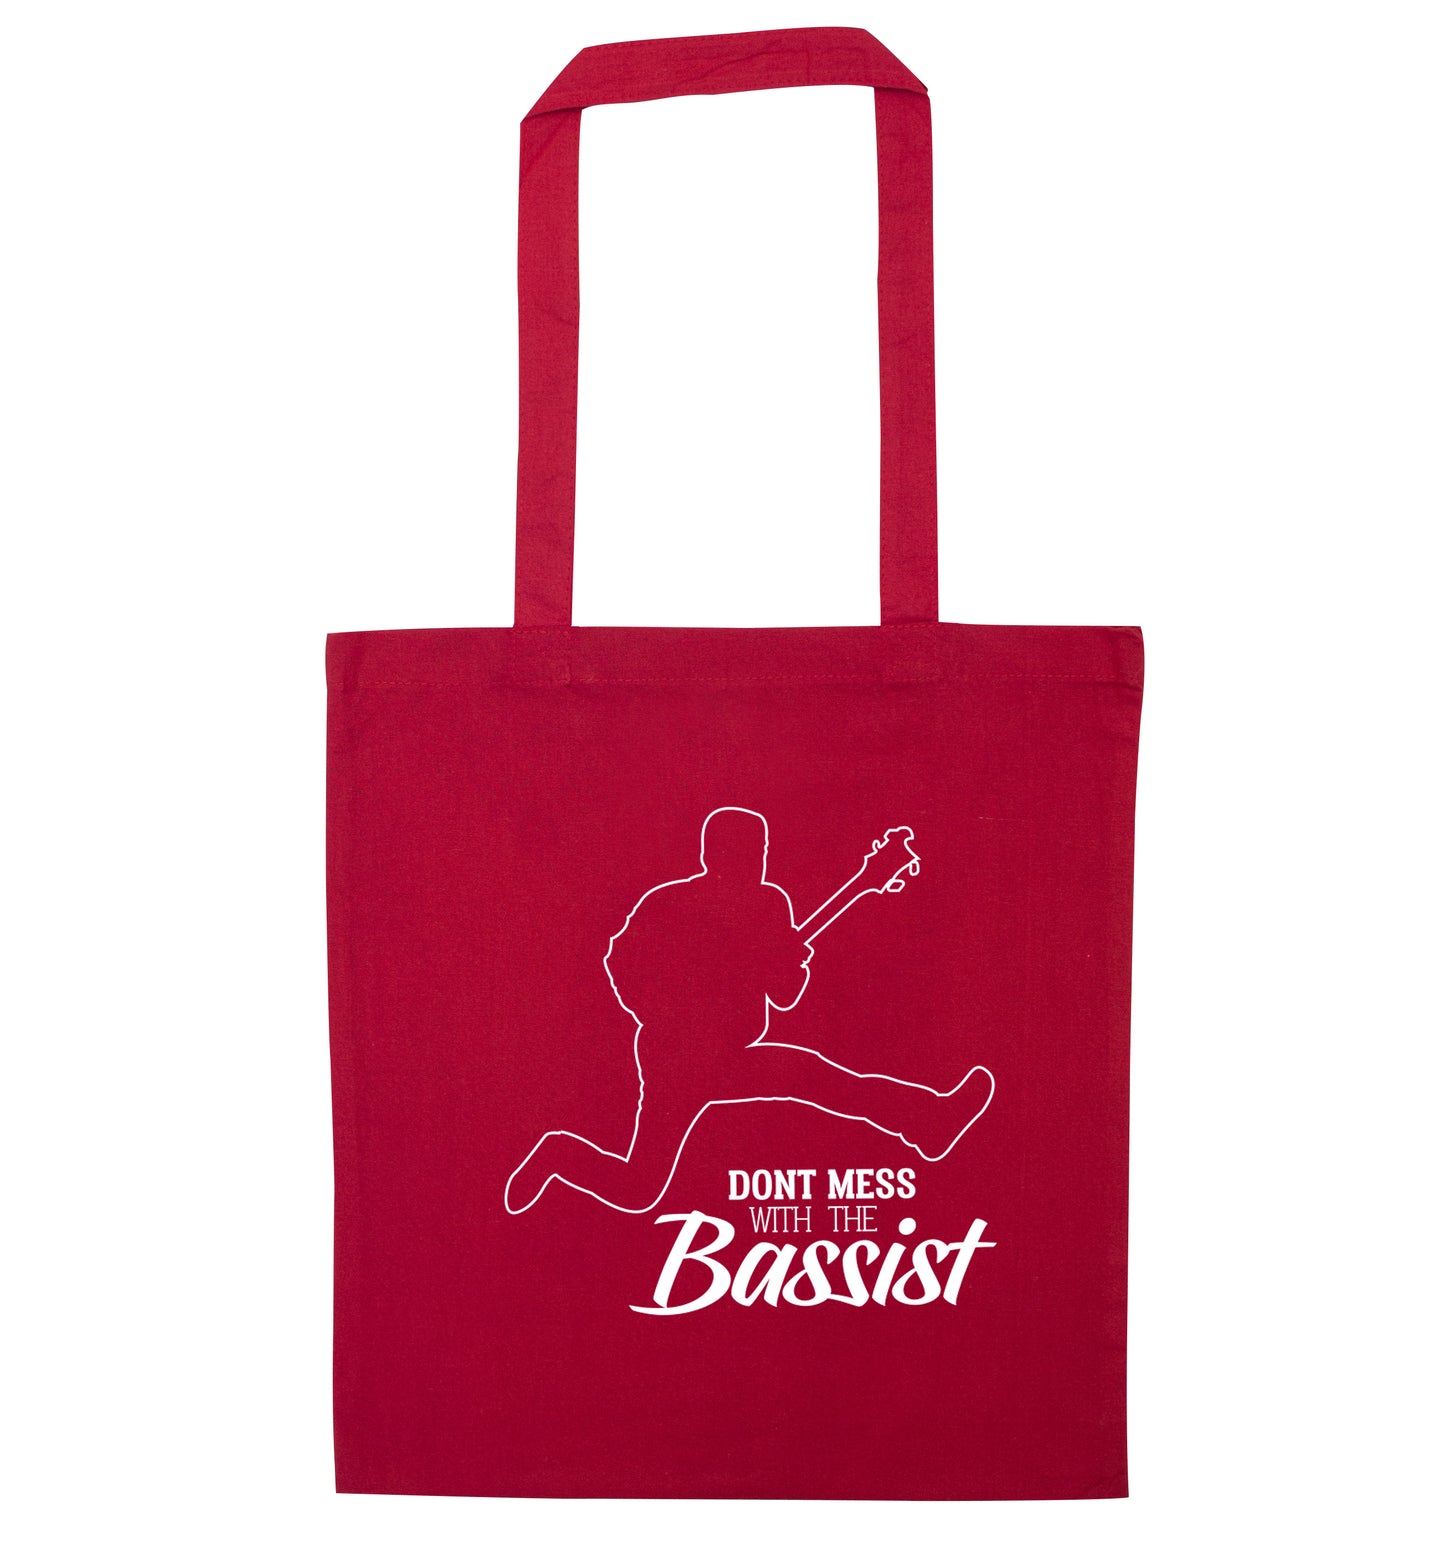 Dont mess with the bassist red tote bag